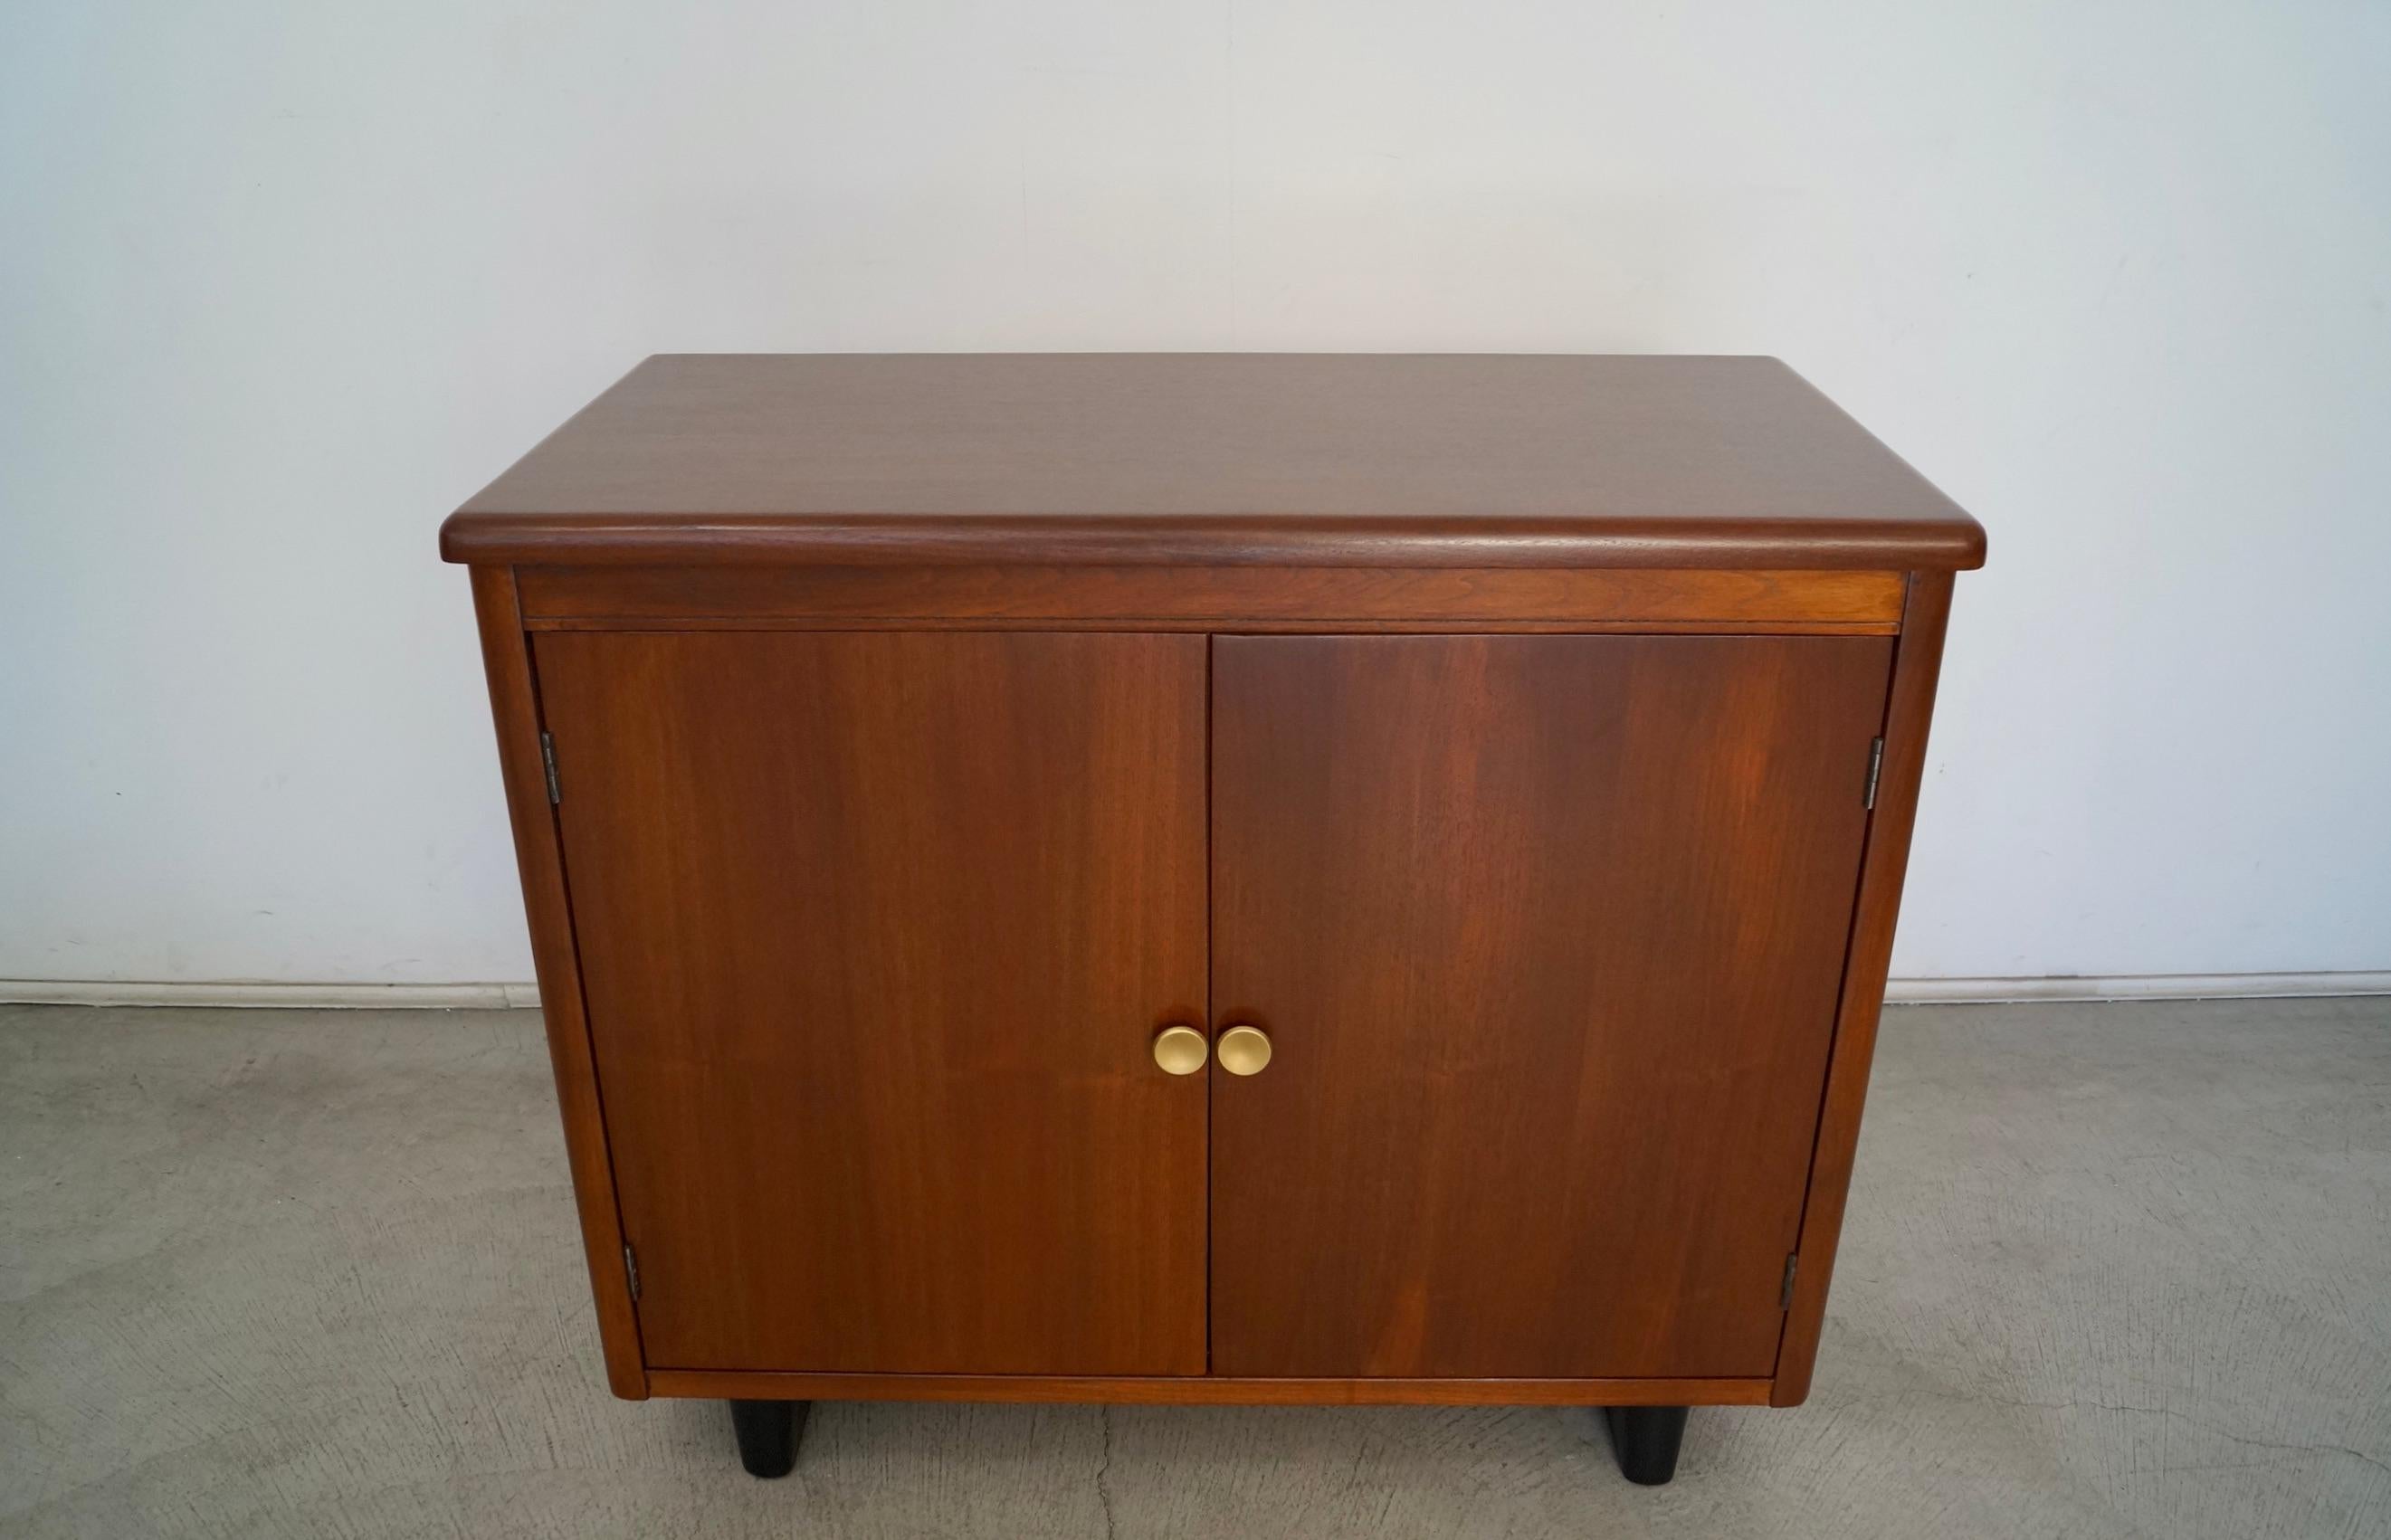 Vintage Midcentury Art Deco cabinet for sale. Manufactured in the 1940's, and has been professionally refinished. It's made of walnut, and has two solid sled bases in black. It was manufactured by Nucraft, and was made in Grand Rapids, Michigan. The